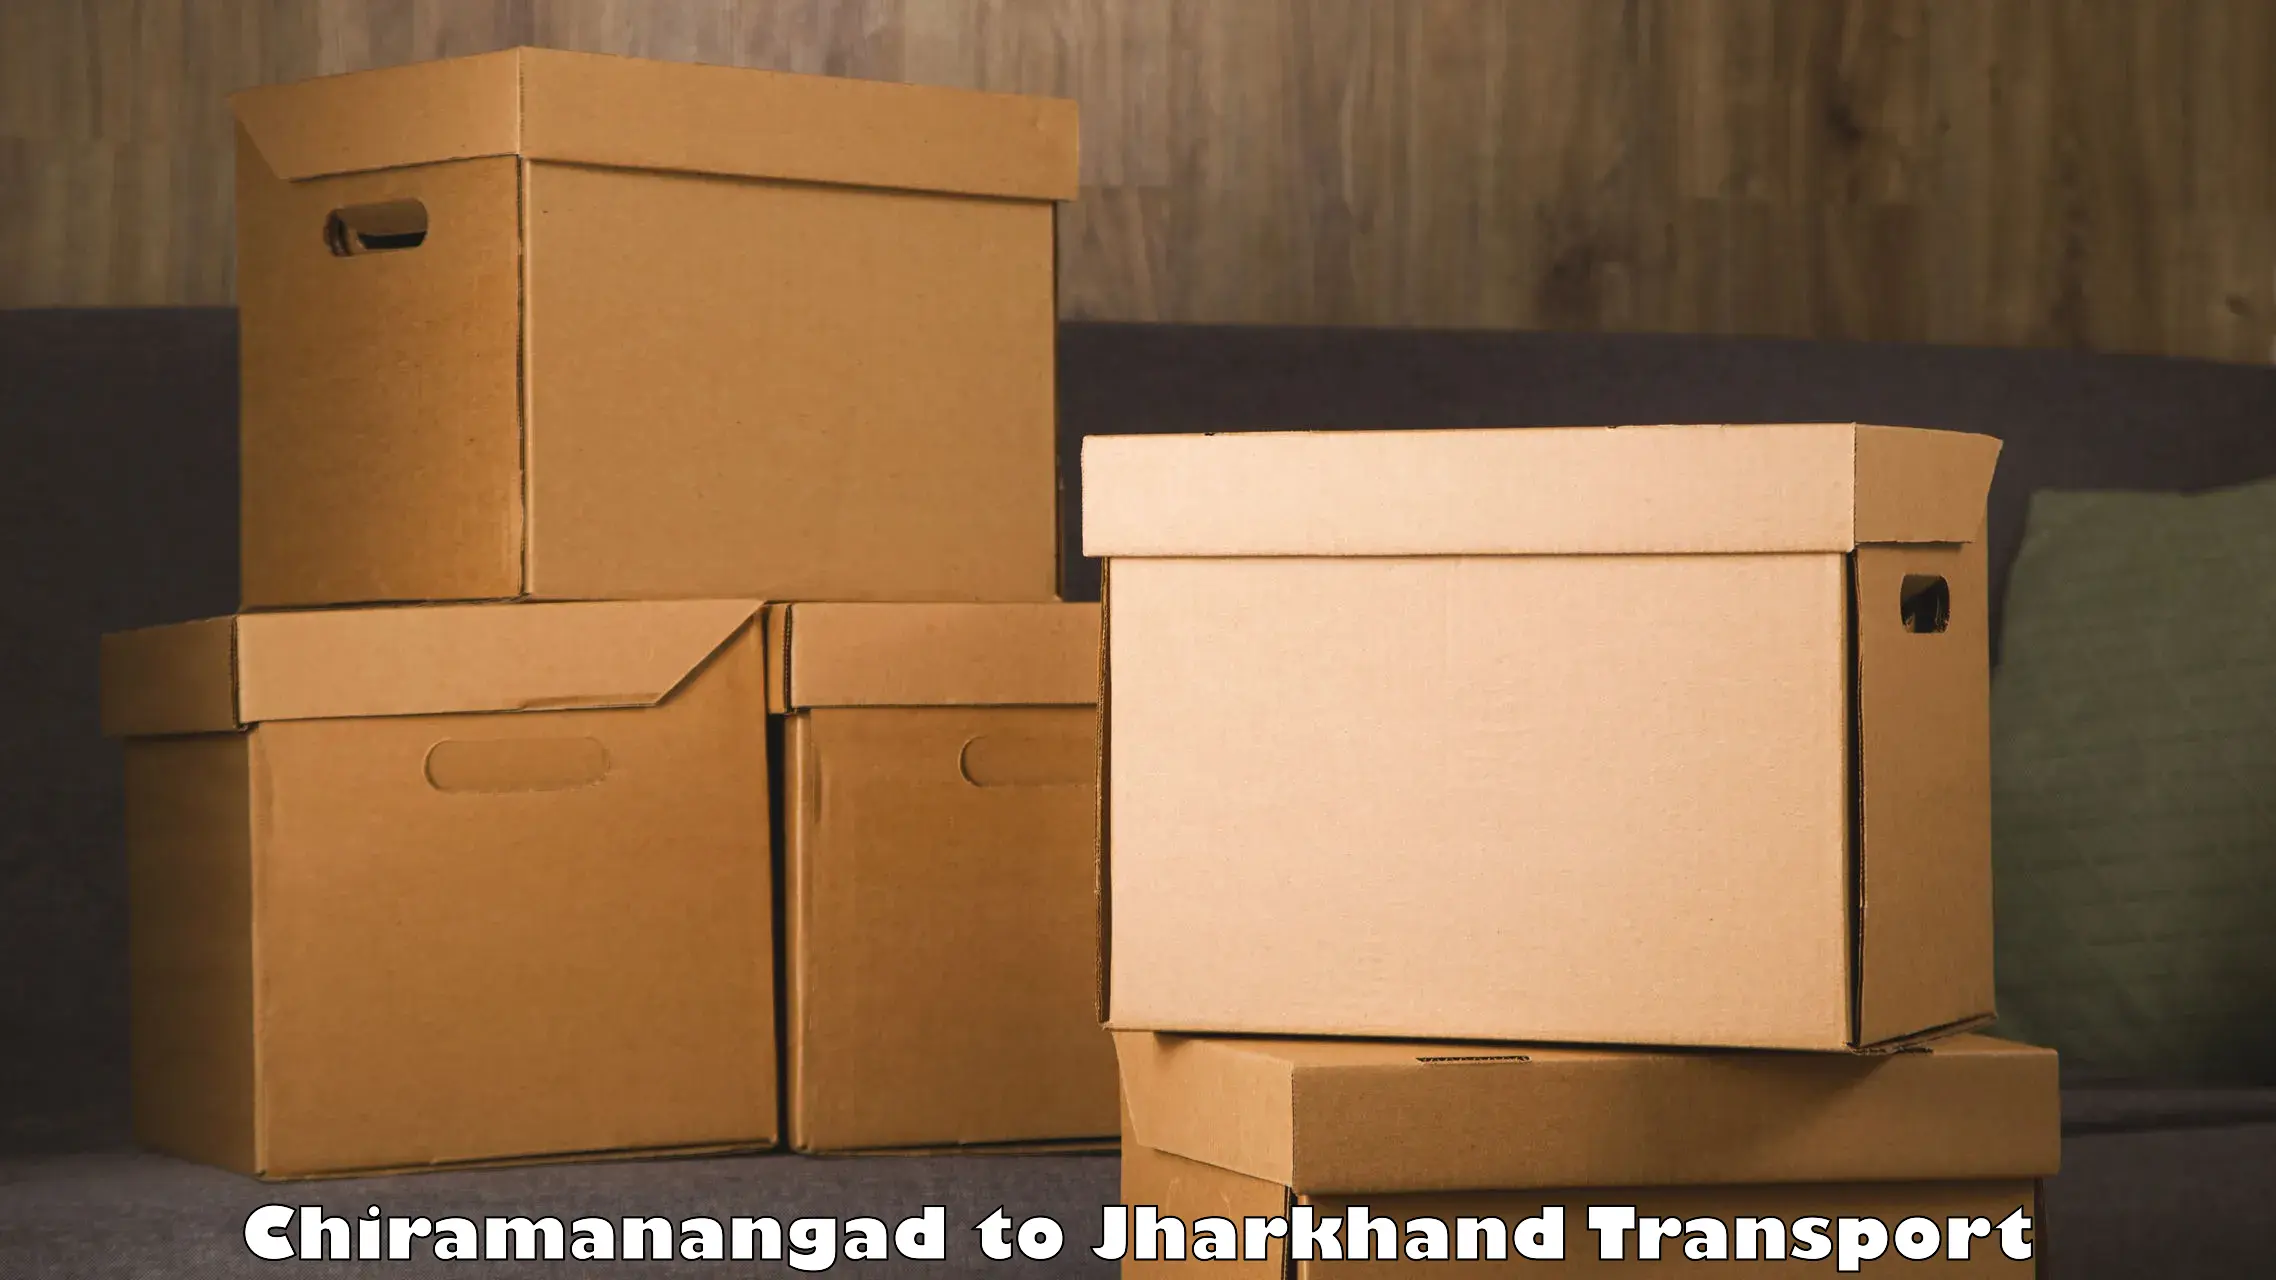 Material transport services Chiramanangad to Jharkhand